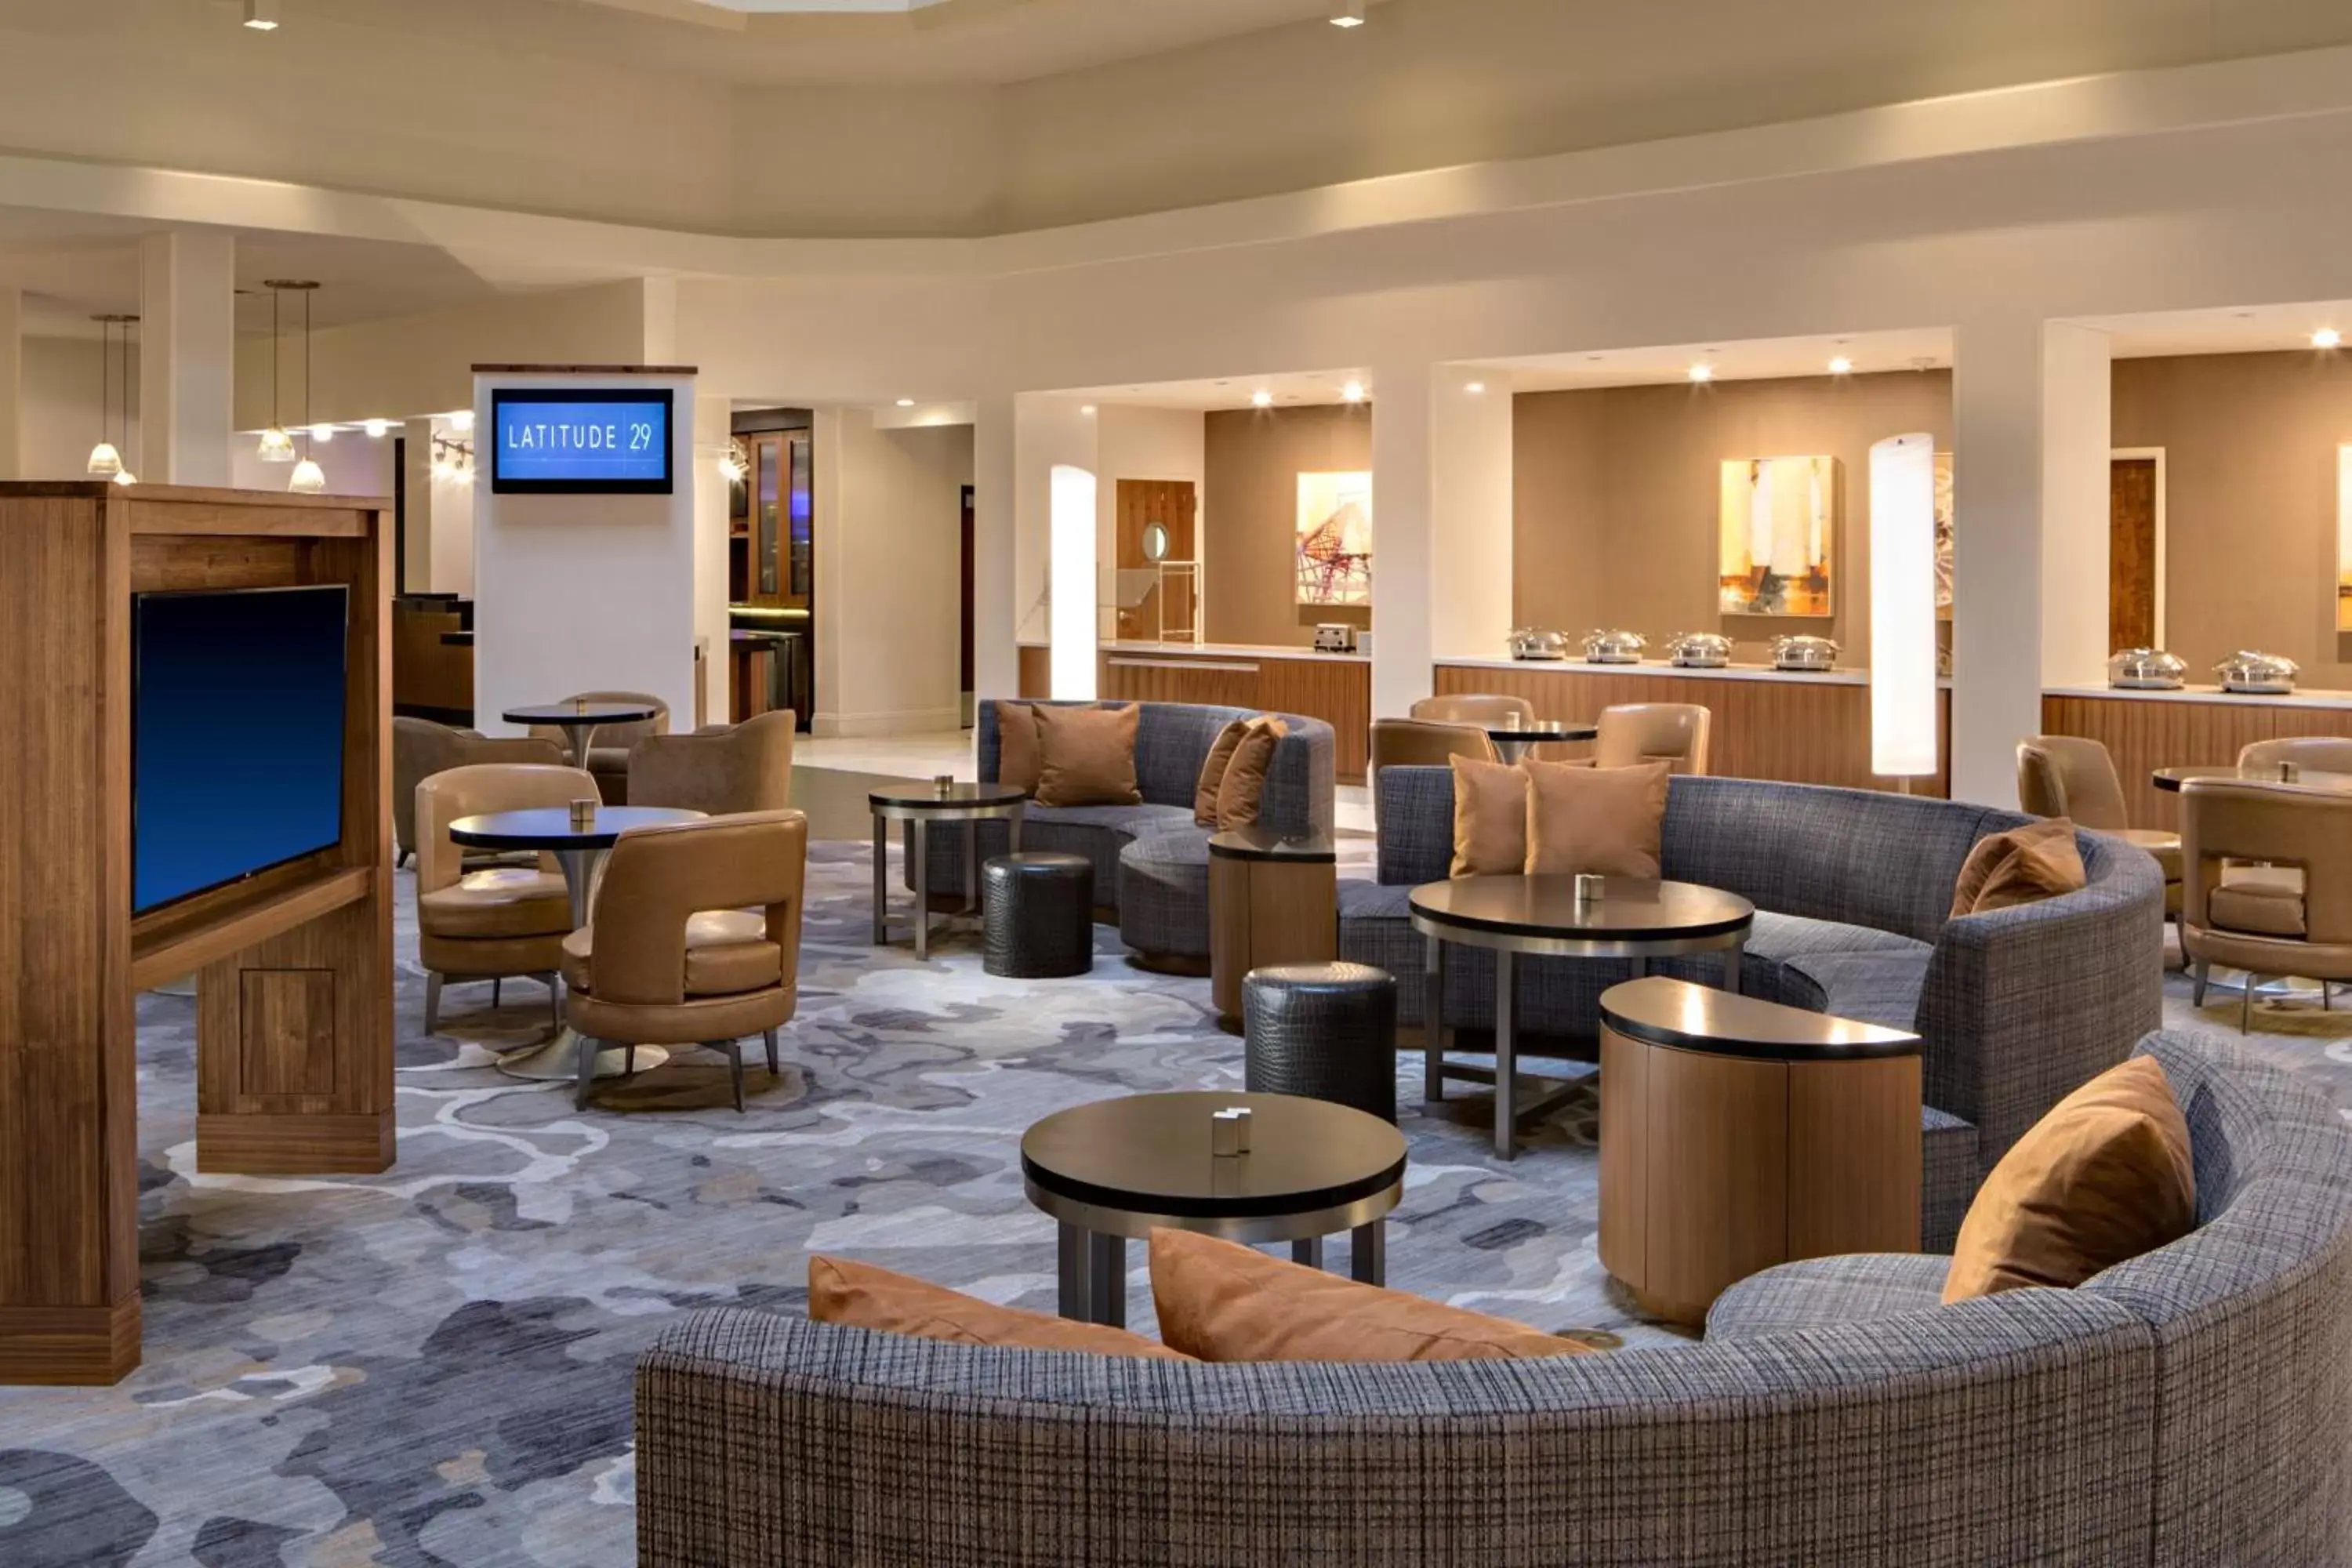 Breakfast, Lounge/Bar in Houston Marriott South at Hobby Airport